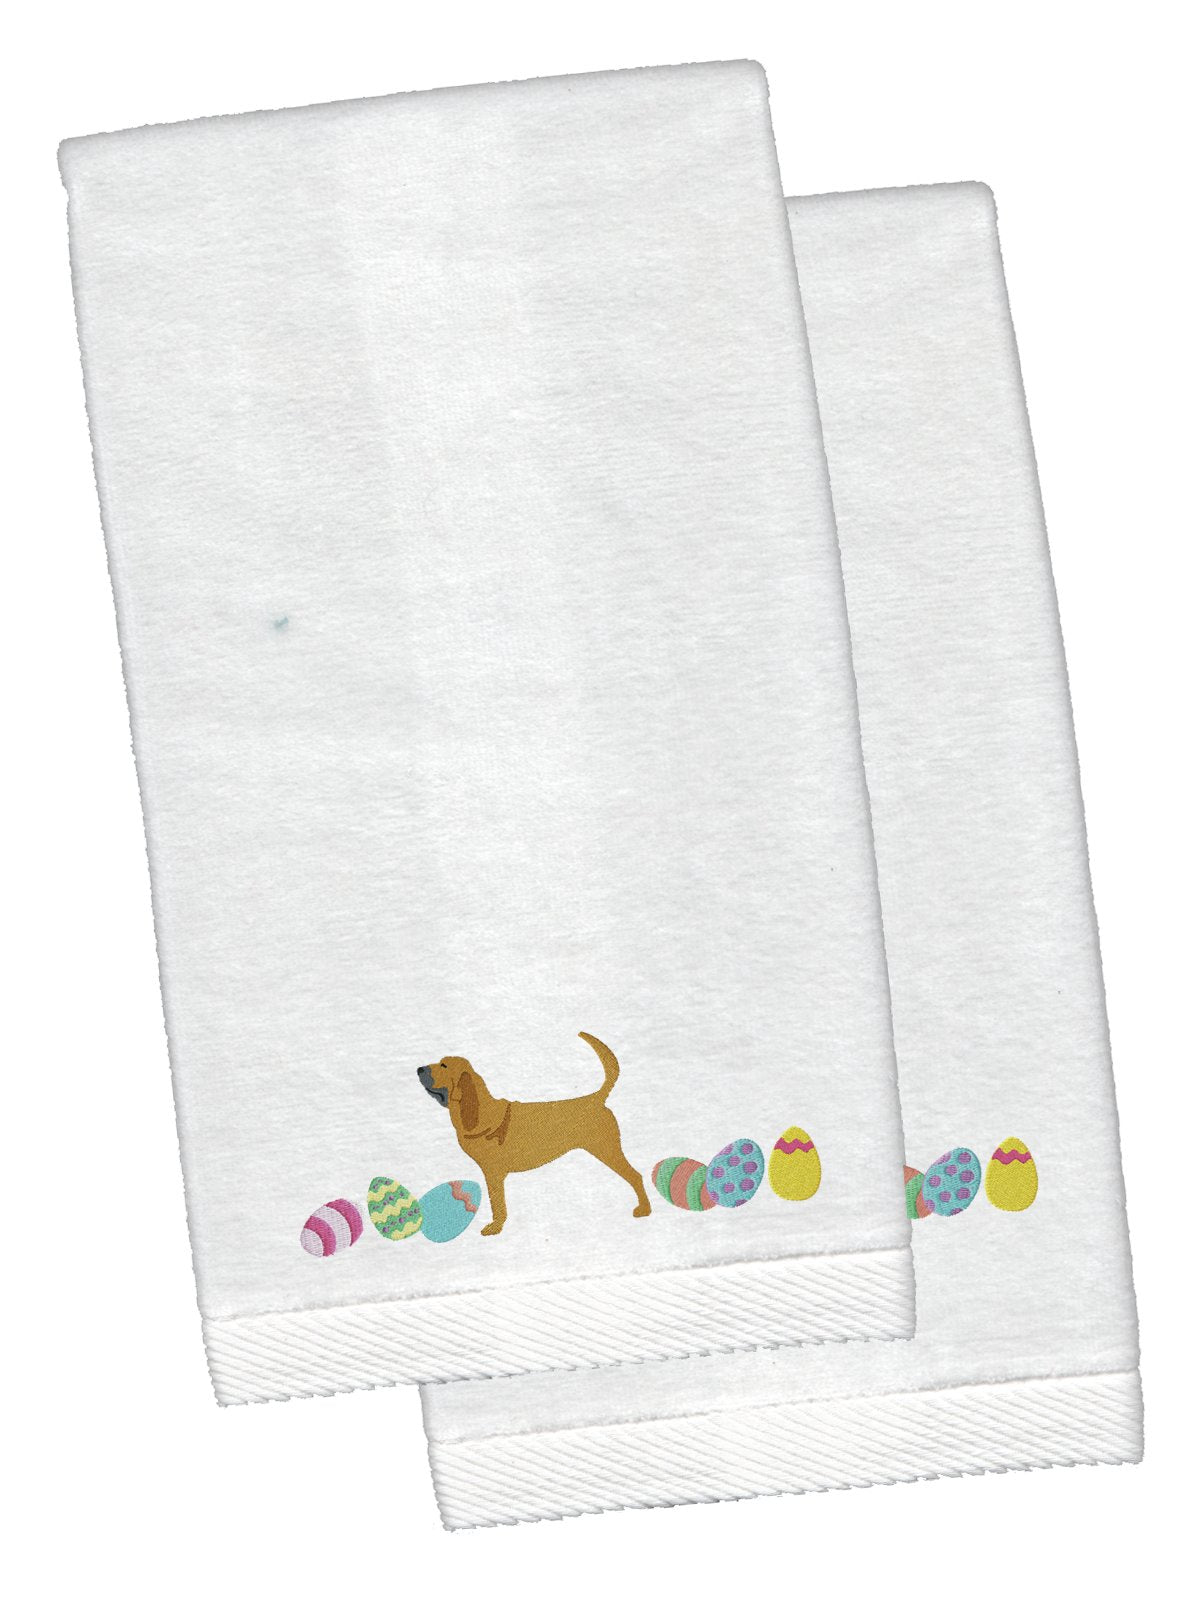 Bloodhound Easter White Embroidered Plush Hand Towel Set of 2 CK1612KTEMB by Caroline's Treasures